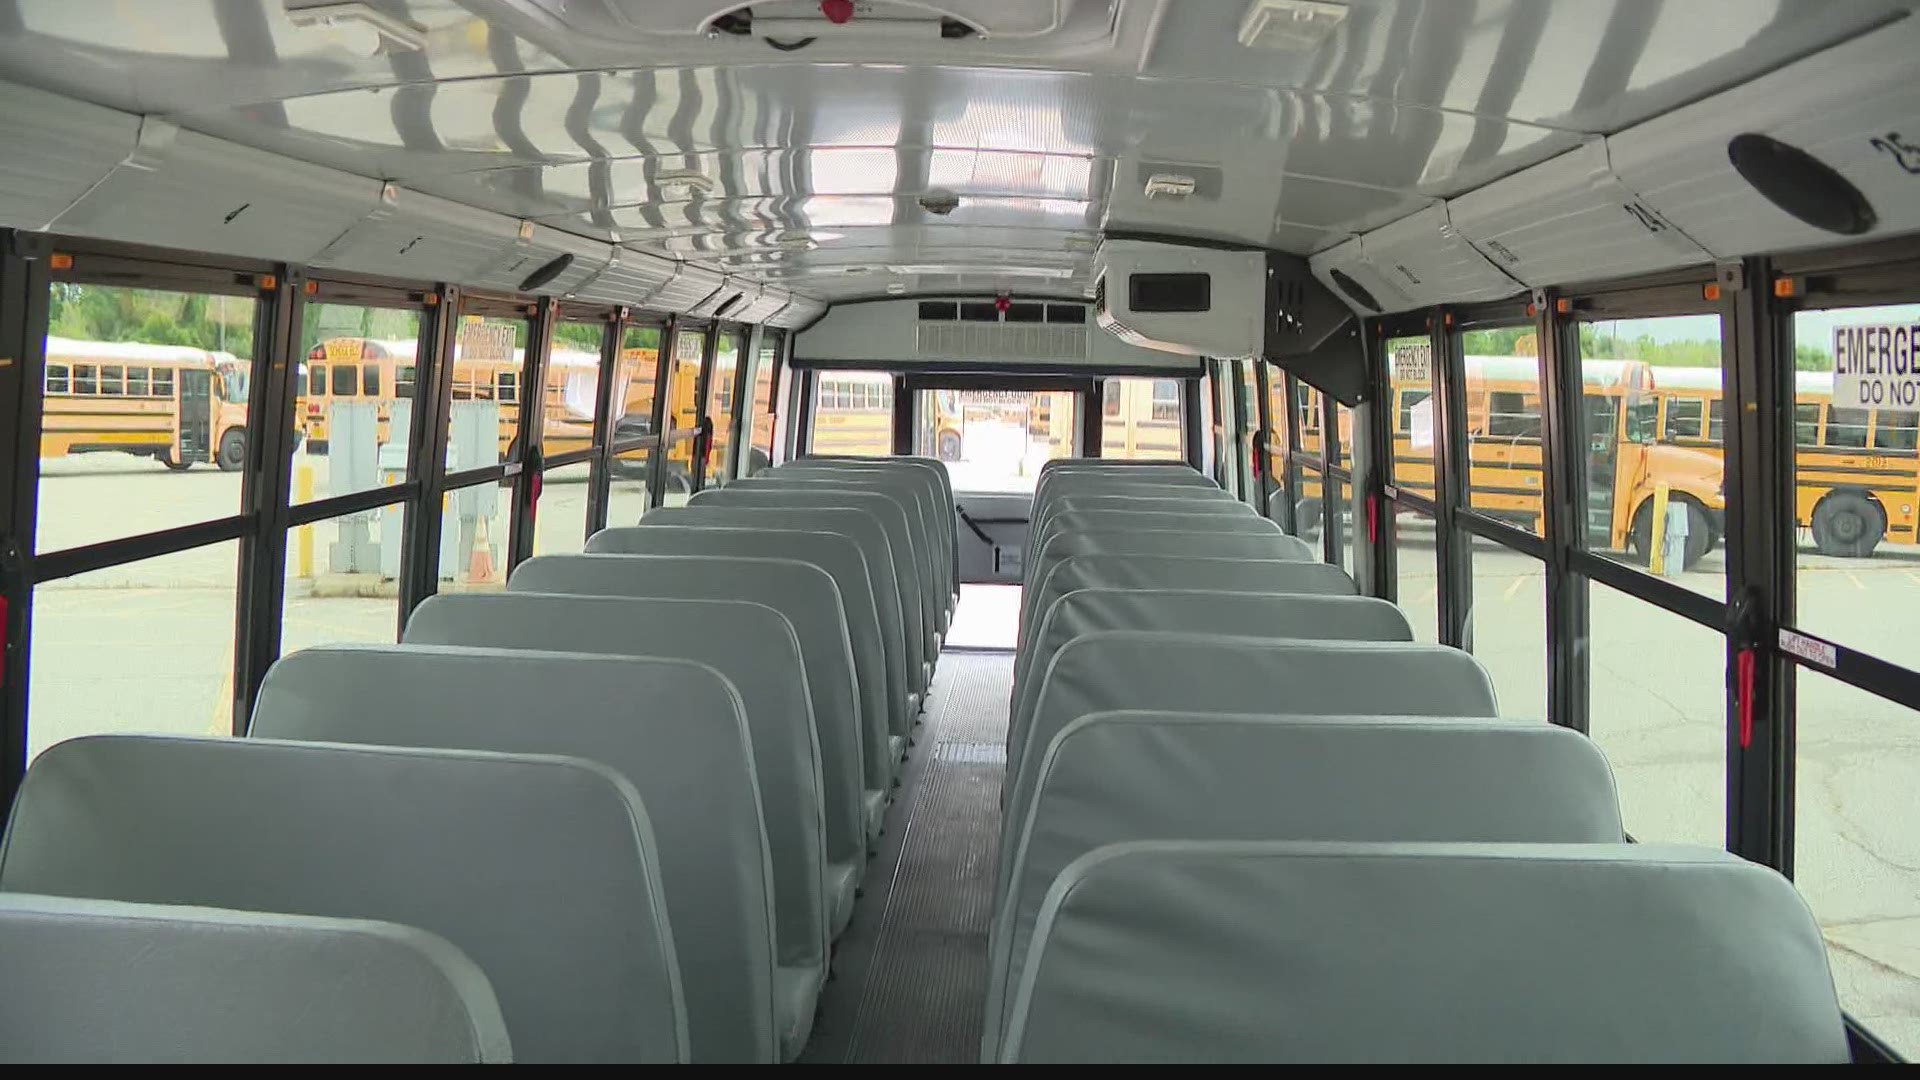 Local schools districts are now making plans to welcome students back to class safely on the school bus.